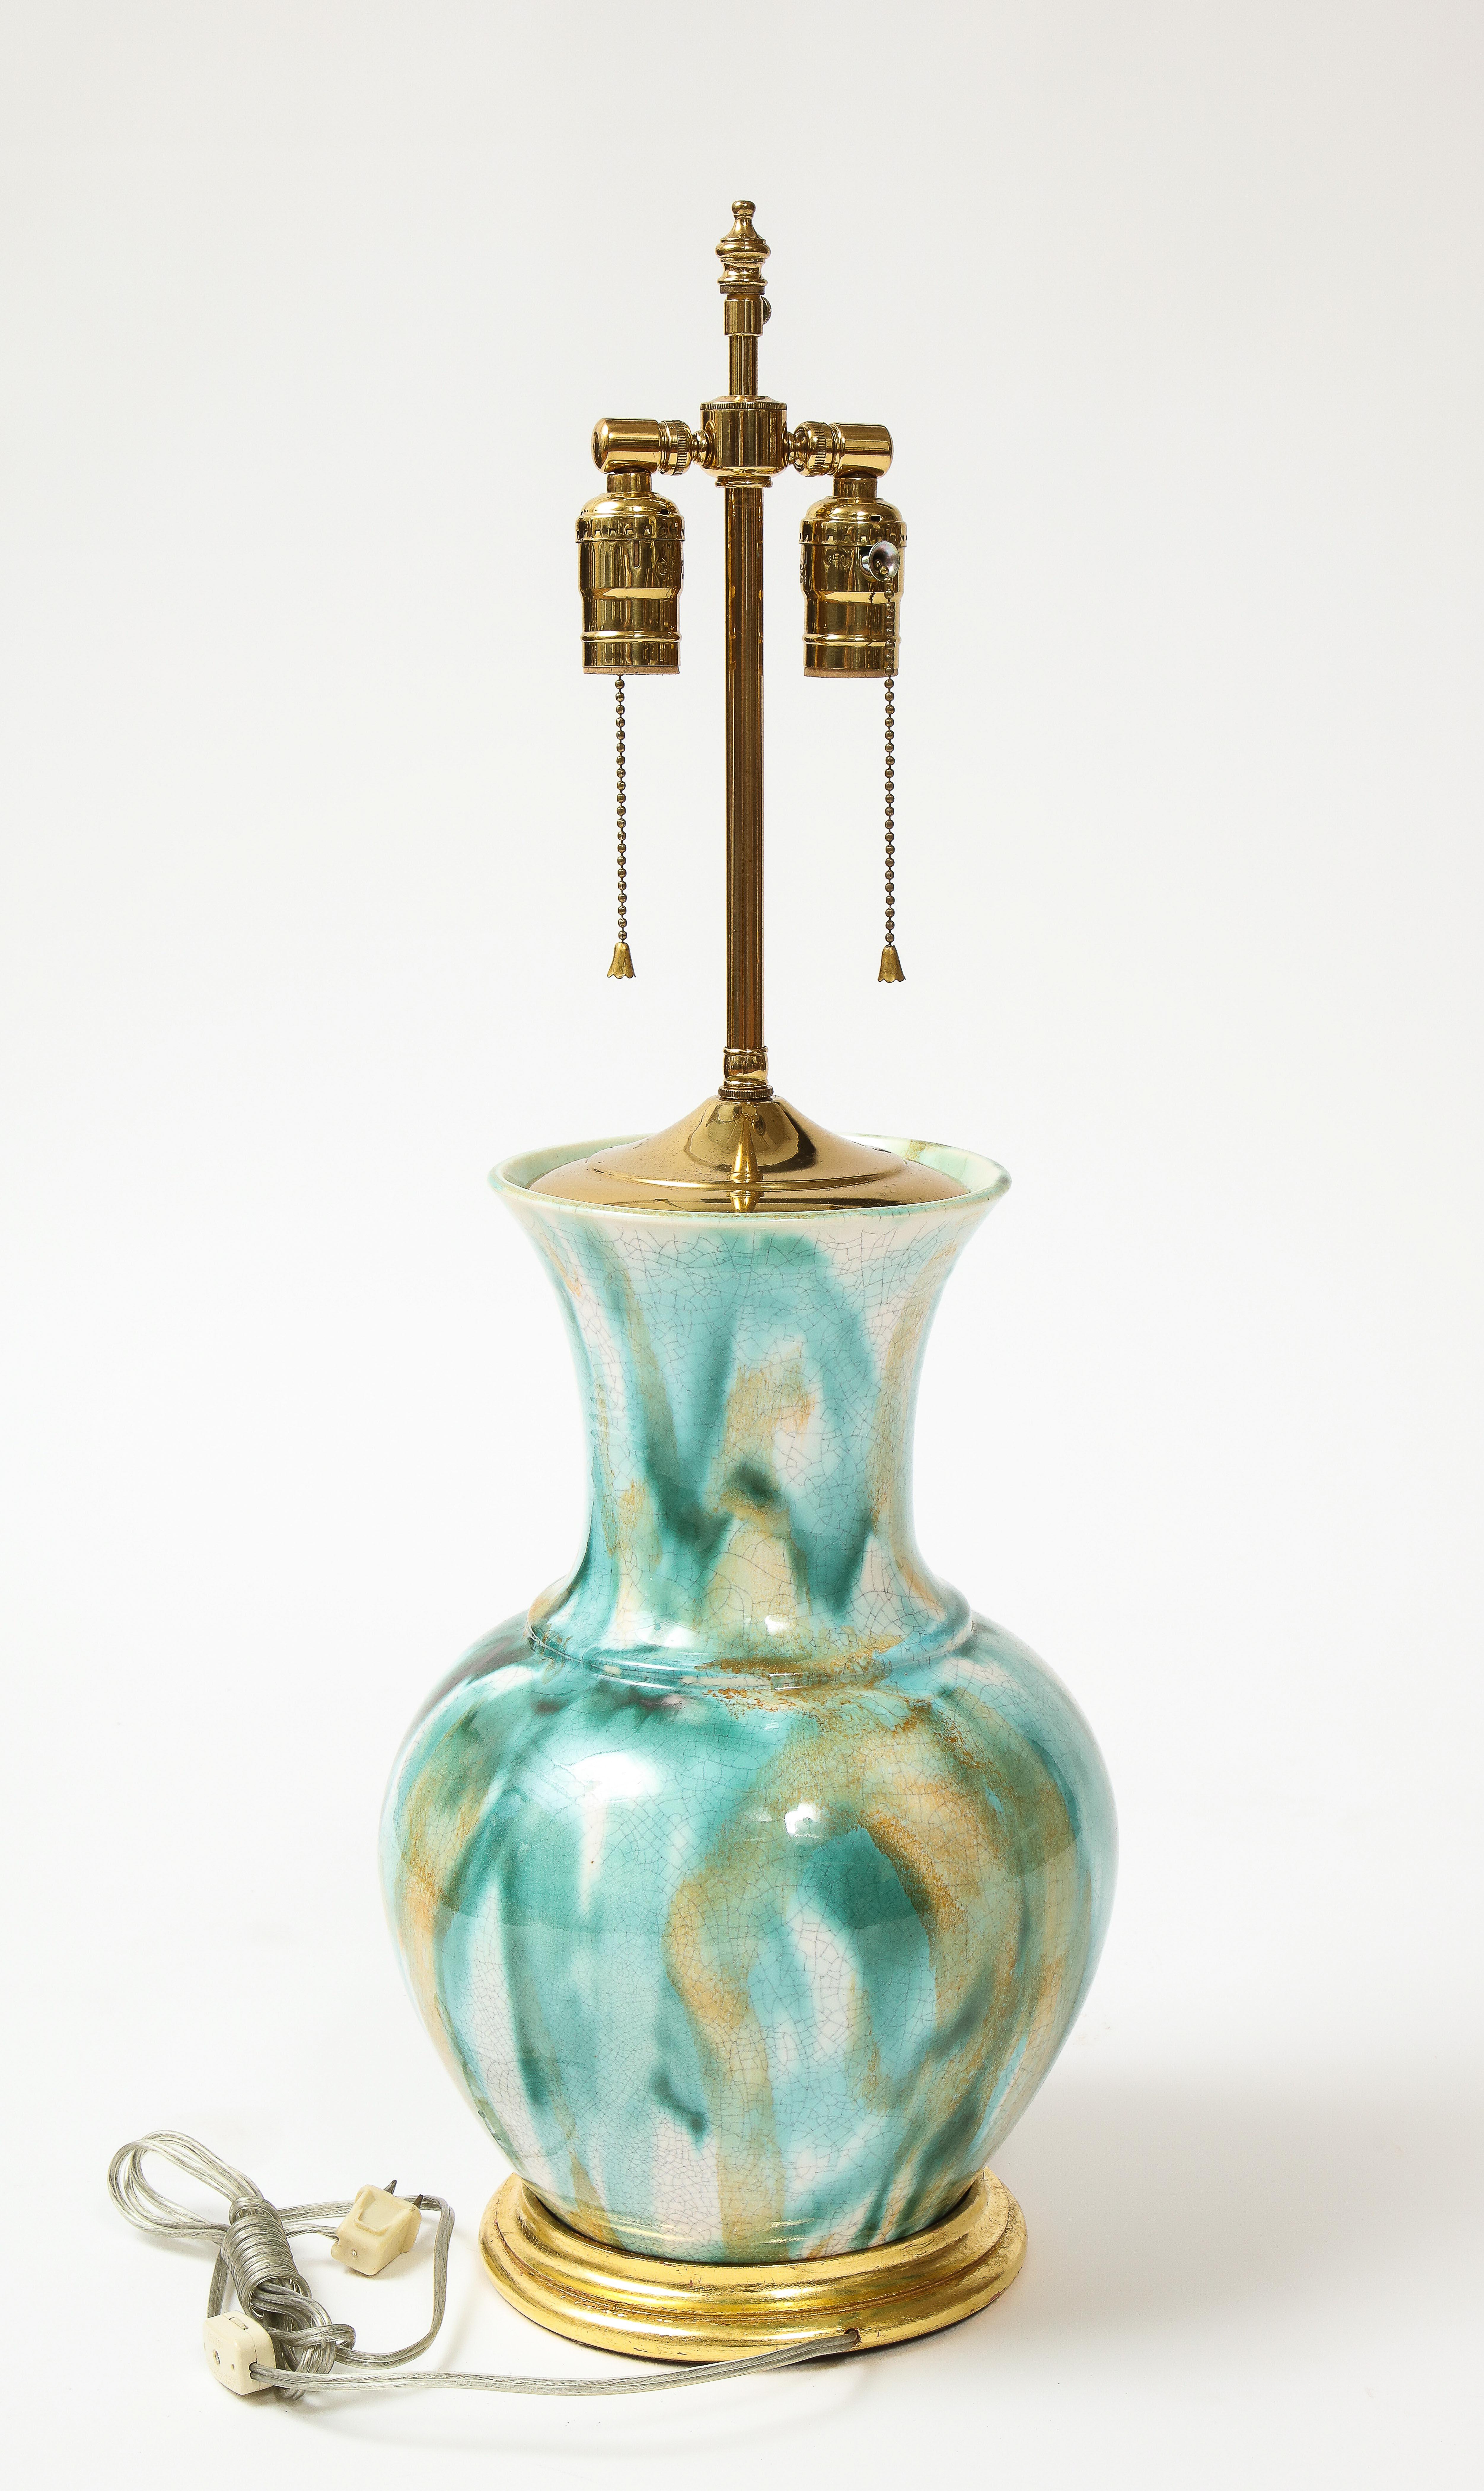 Of baluster form and marbled overall in green and orange glaze on a white ground, mounted on a giltwood turned base; fitted with brass bulb sockets and adjustable rod for height. American.